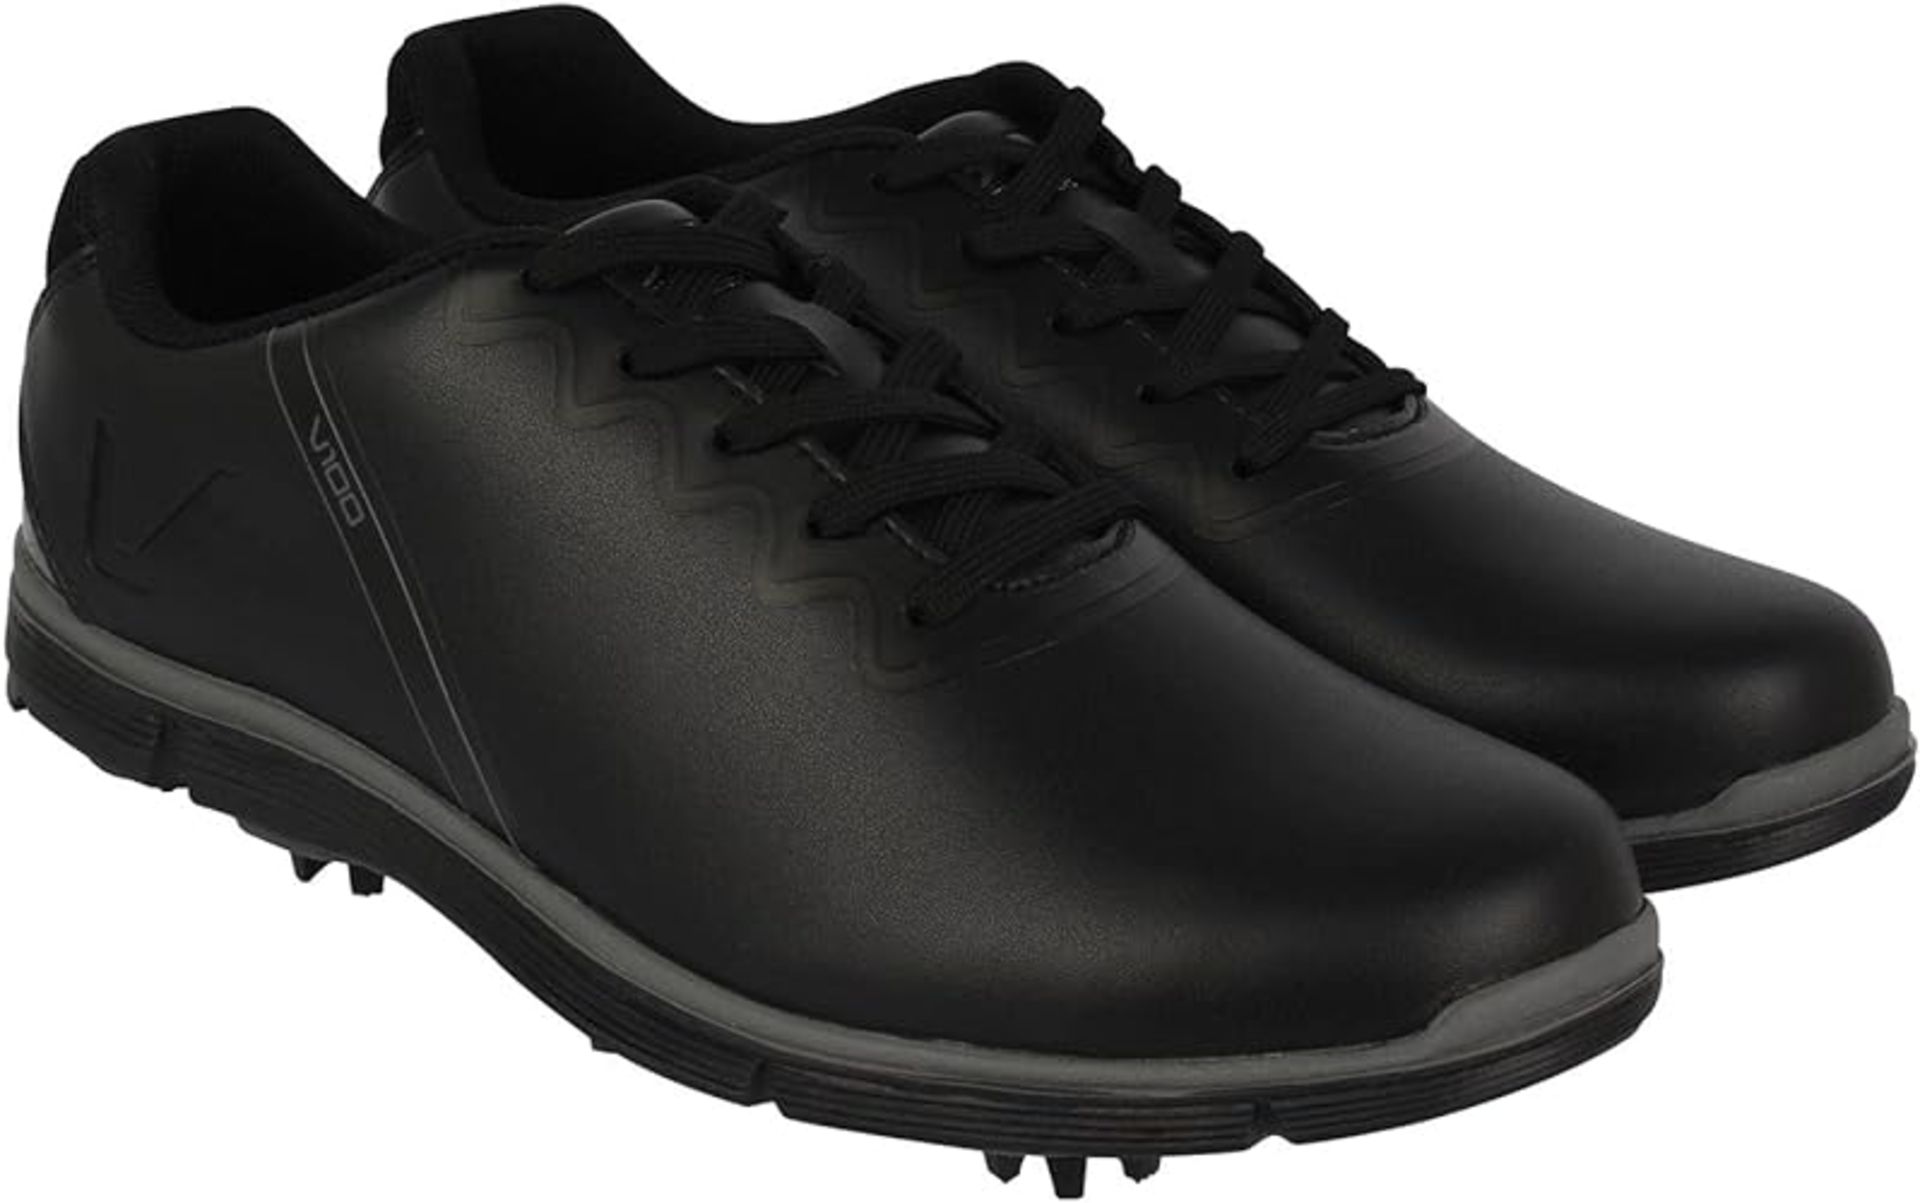 2 X BRAND NEW PAIRS OF SLAZENGER BLACK V100 PROFESSIONAL GOLF SHOES SIZE 11 RRP £89 EACH S1RA - Image 3 of 3